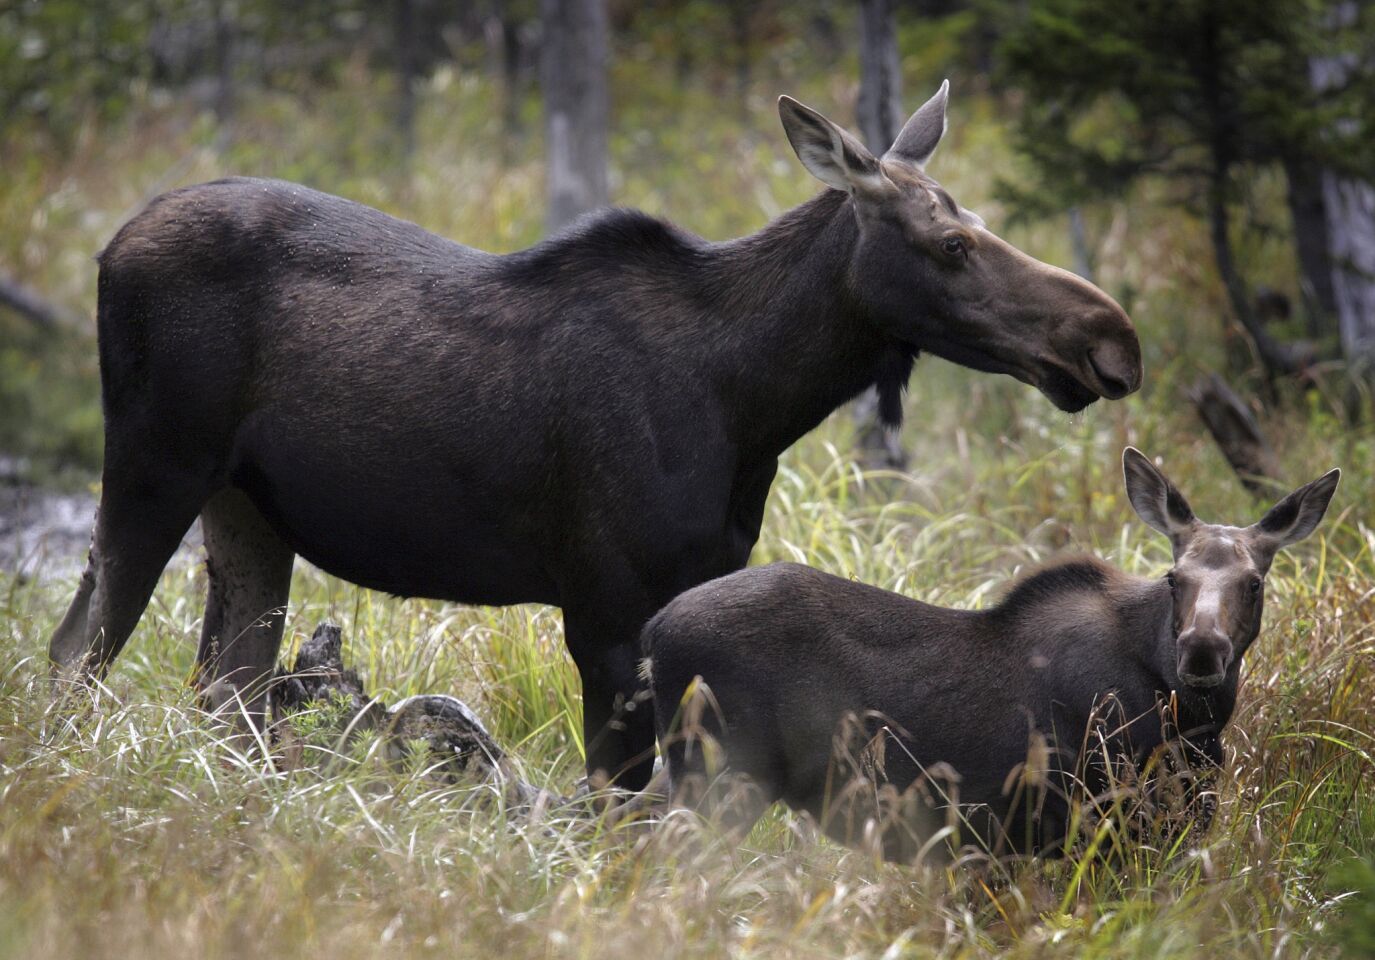 U.S. moose populations are dropping precipitously, and though there are several theories about the main culprit -- worsening infestations of ticks and other parasites, heat stress or pine beetles that damage its habitat, the northern forests -- all are linked to climate change. Above: Moose in Franconia, N.H. MORE YEAR IN REVIEW: Ted Rall's five best cartoons of 2013 Washington's 5 biggest 'fails' of 2013 10 tips for a better life from The Times' Op-Ed pages in 2013